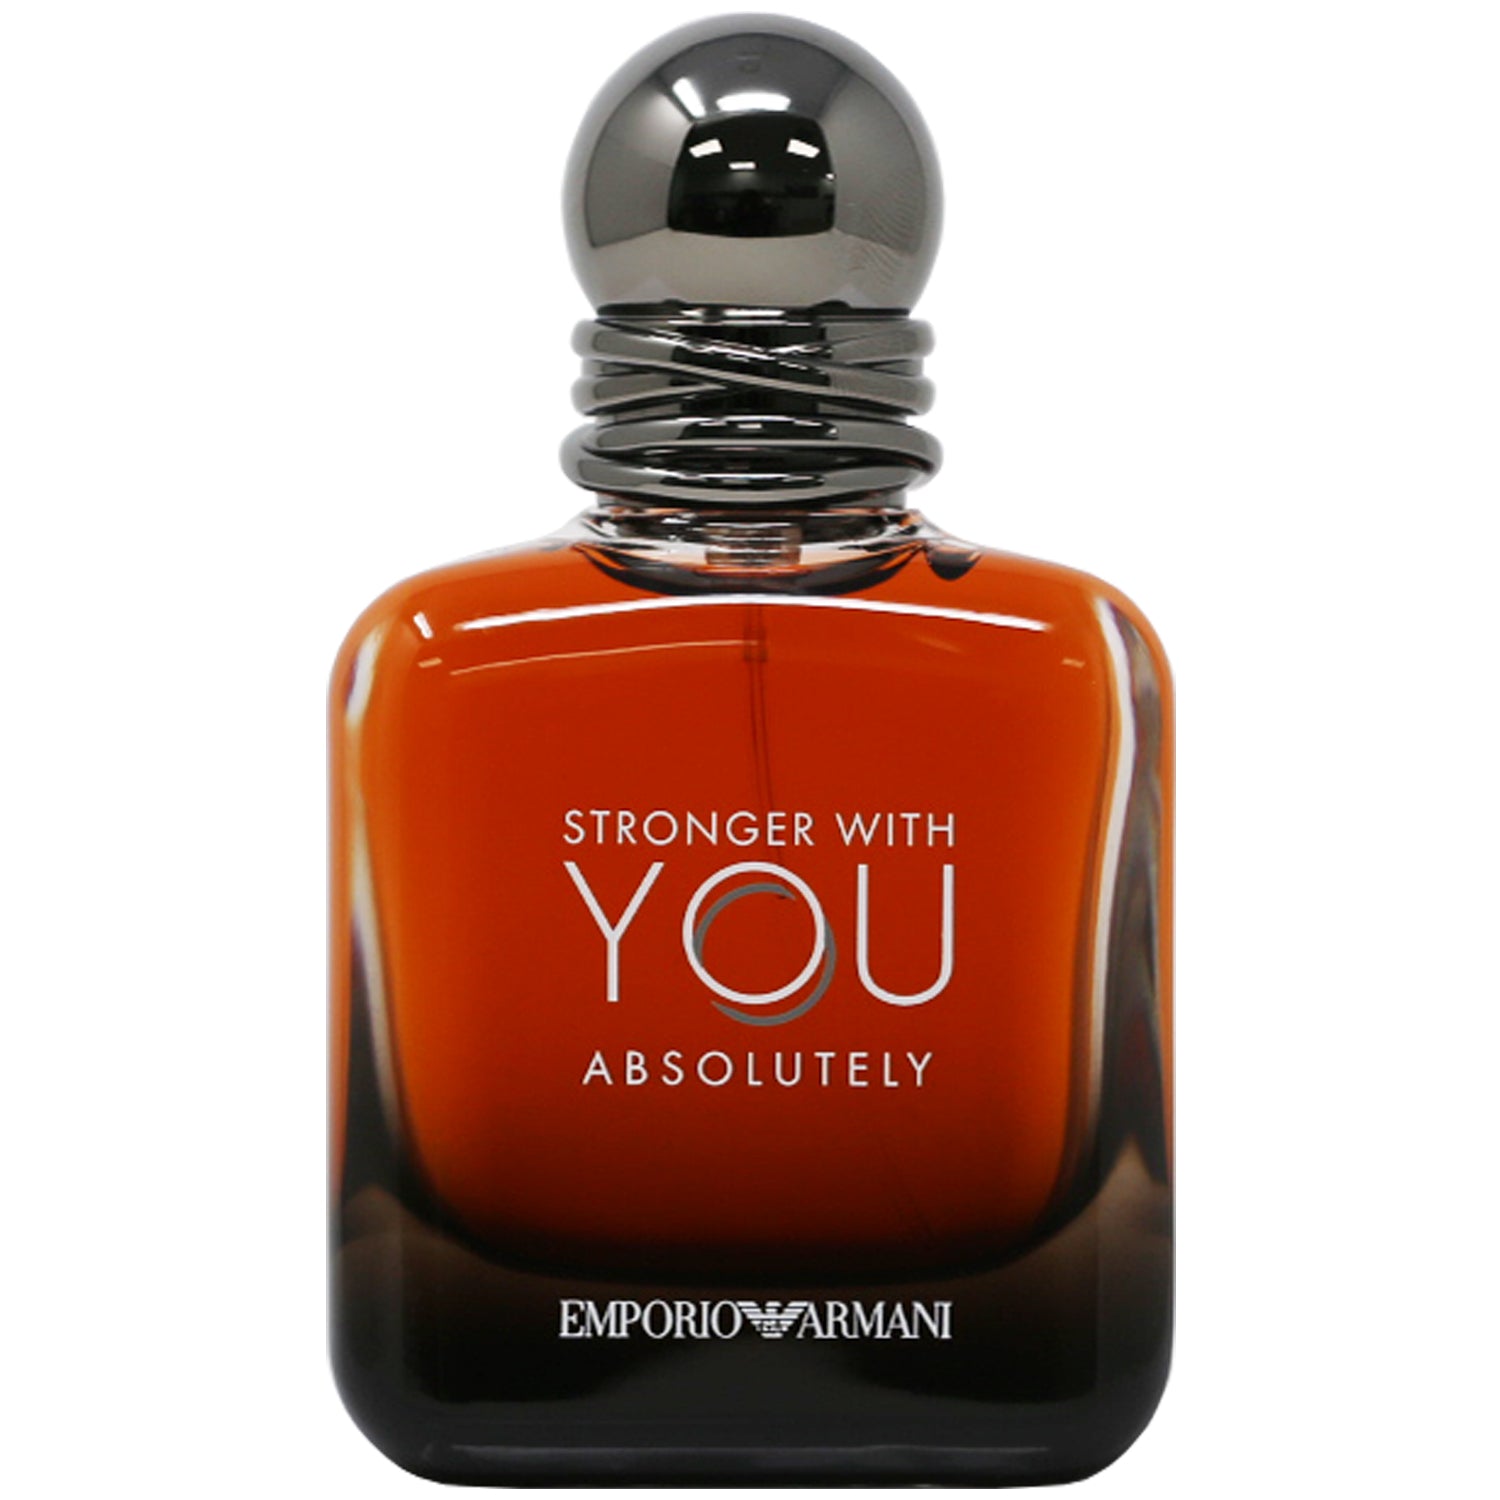 Emporio Armani Stronger With You Absolutely Fragrance Review #cologne , Stronger With You Intensely